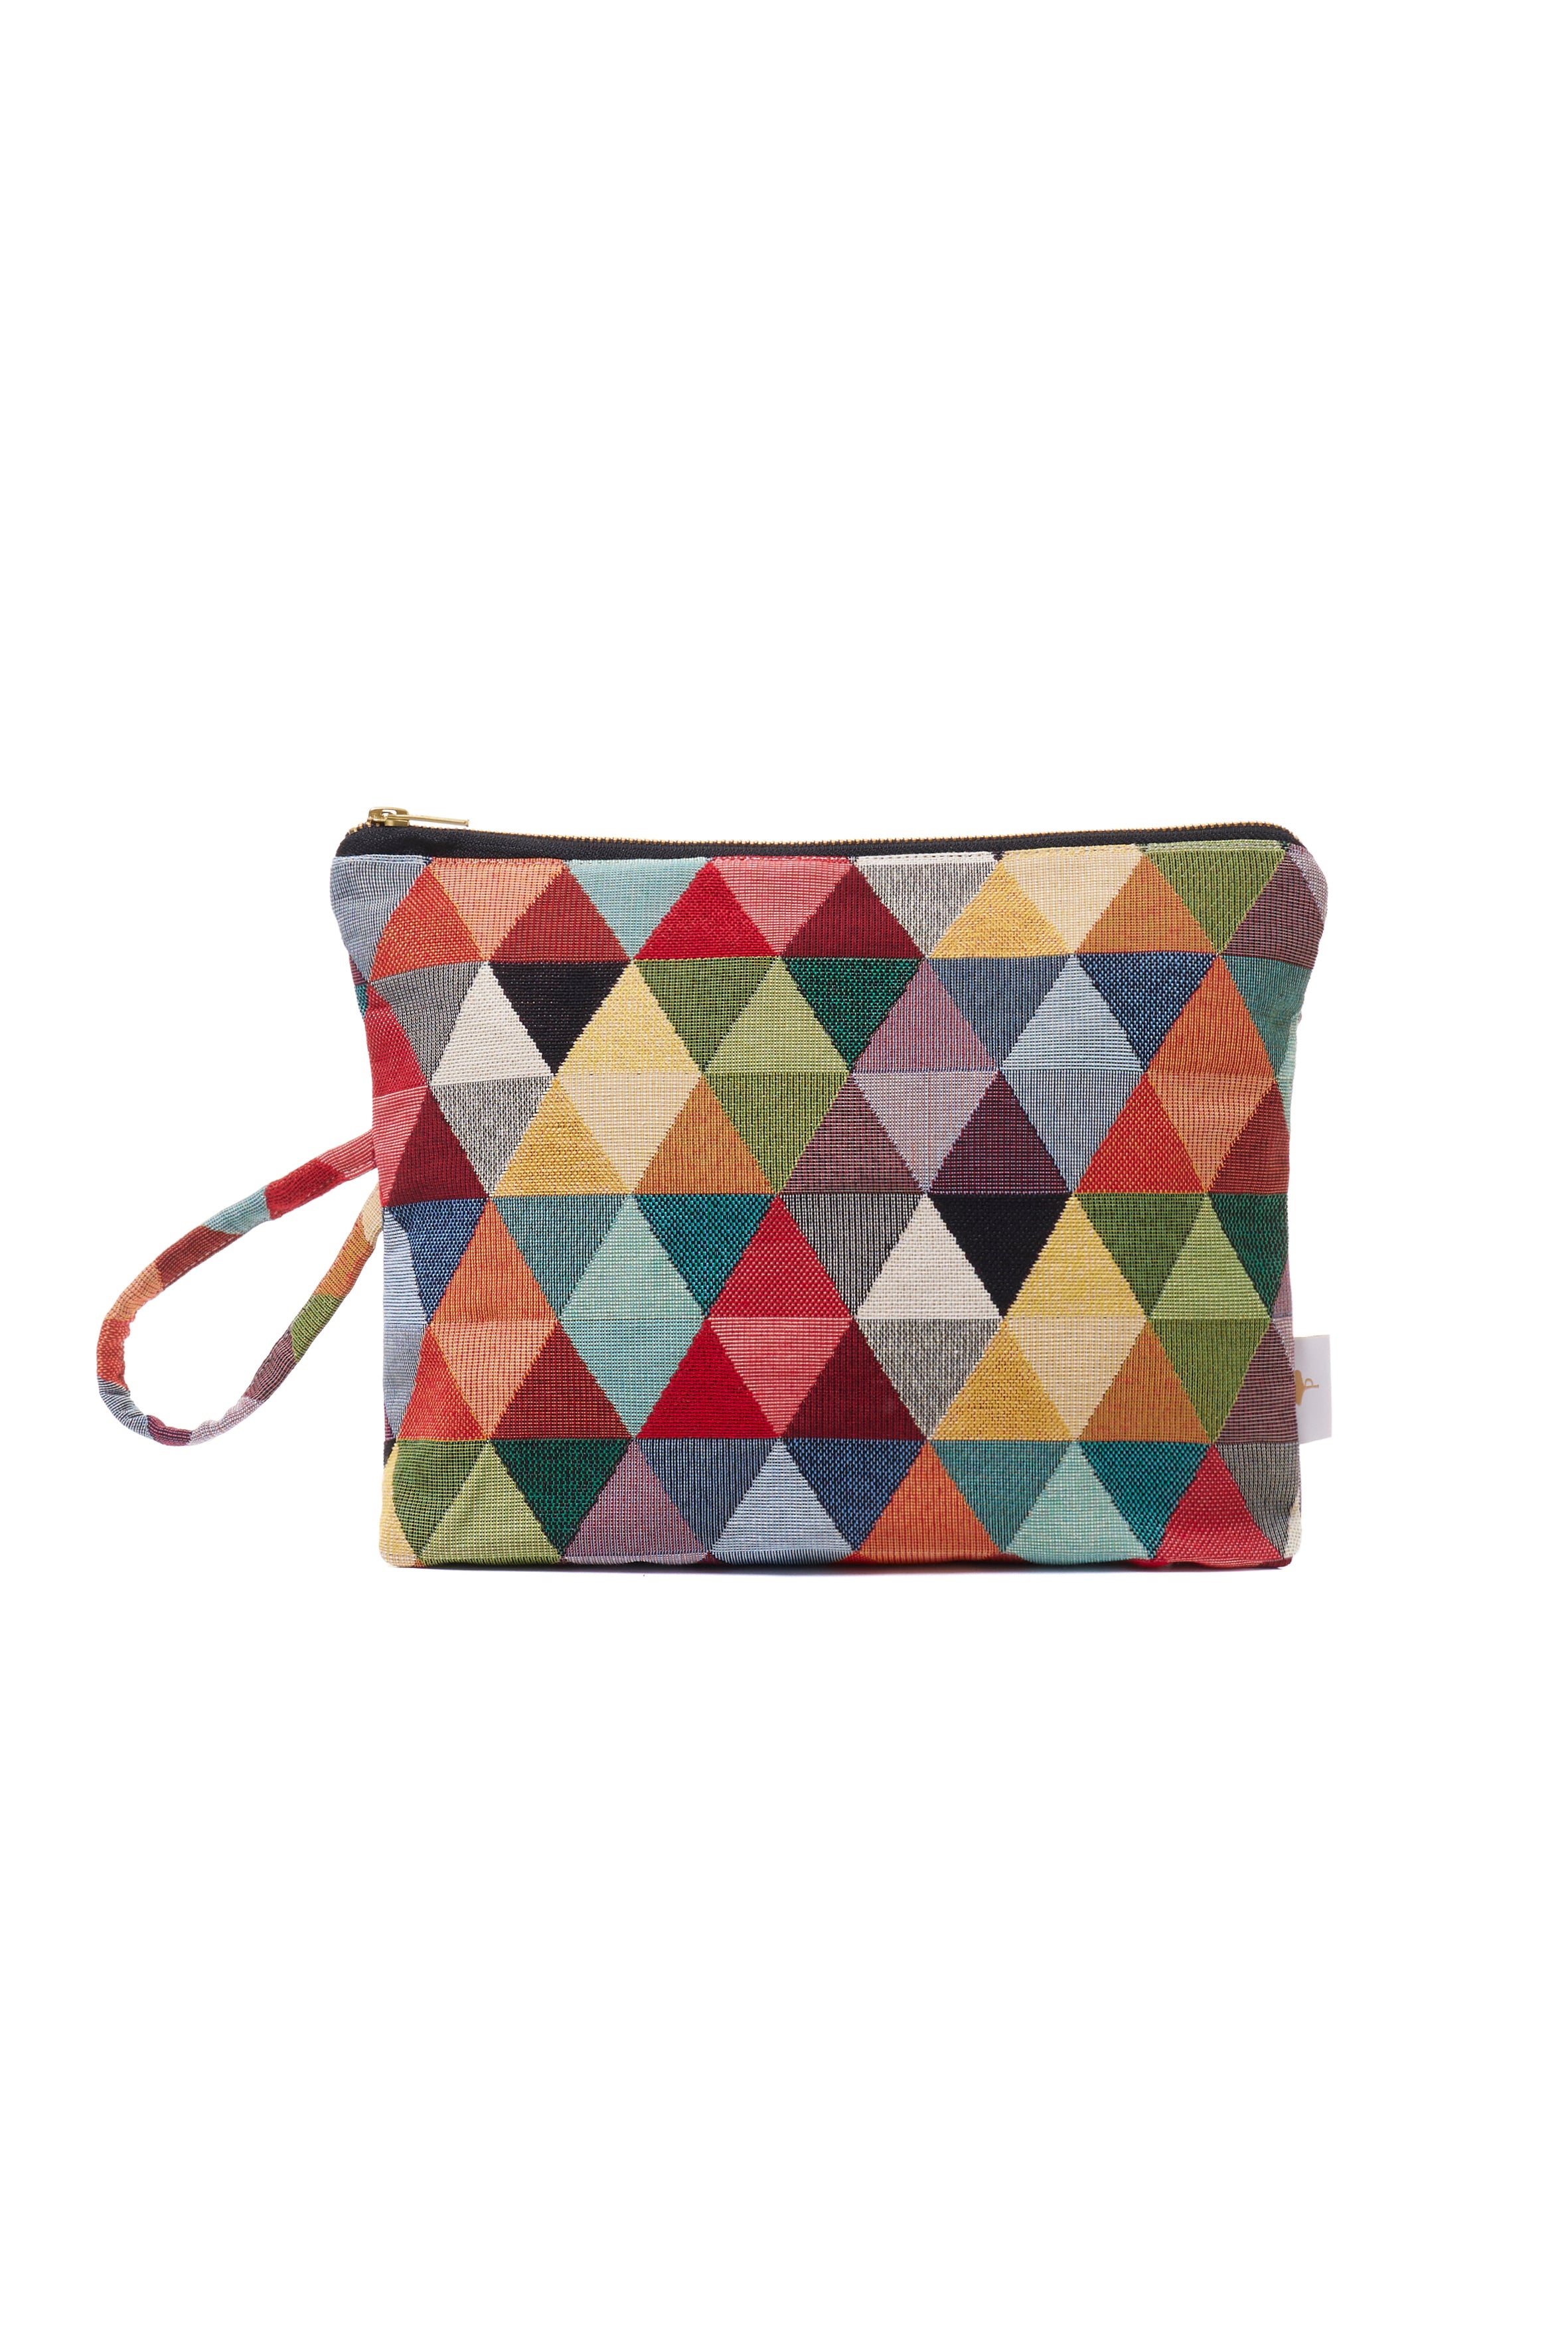 TRAVEL POUCH LARGE - GEOMETRIC